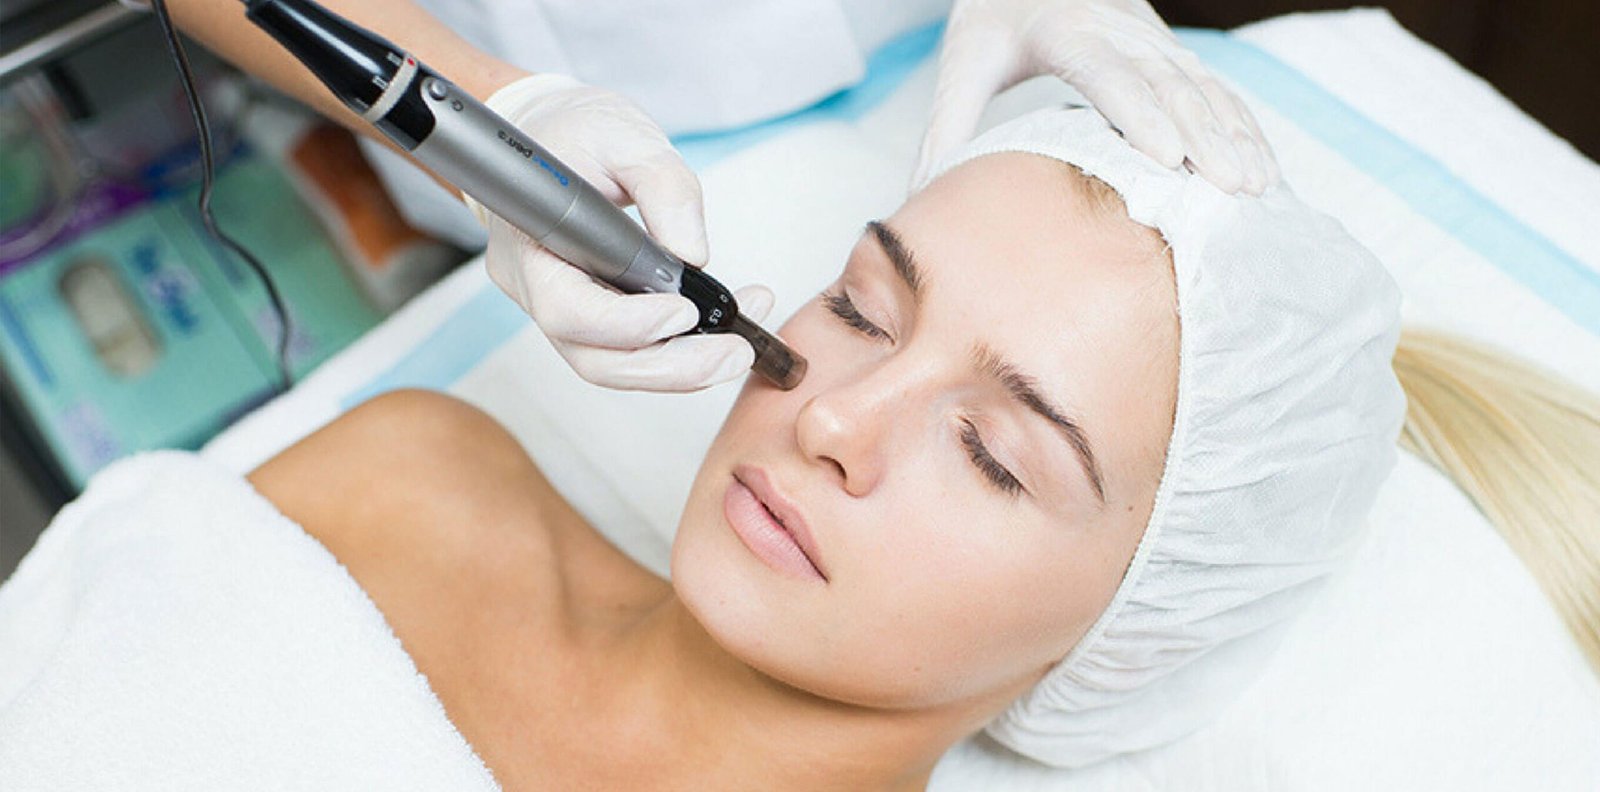 Life Mind Body by Karen Howell, Facial and Hair Aesthetics in Wokingham - Microneedling Treatment